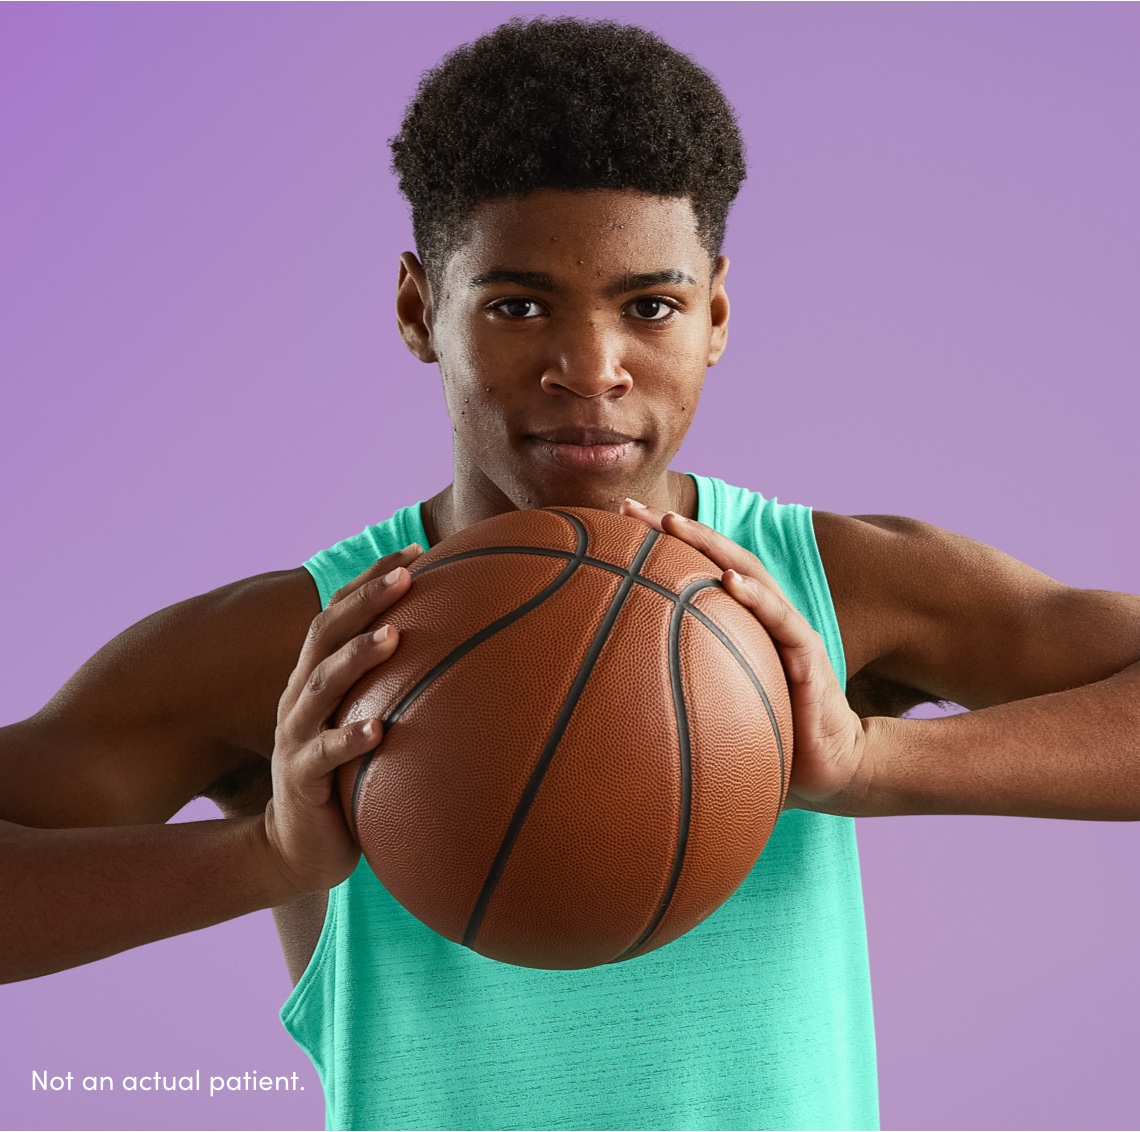 Male grasping basketball reflects teenage acne patients benefited as part of the AKLIEF® (trifarotene) Cream pivotal studies